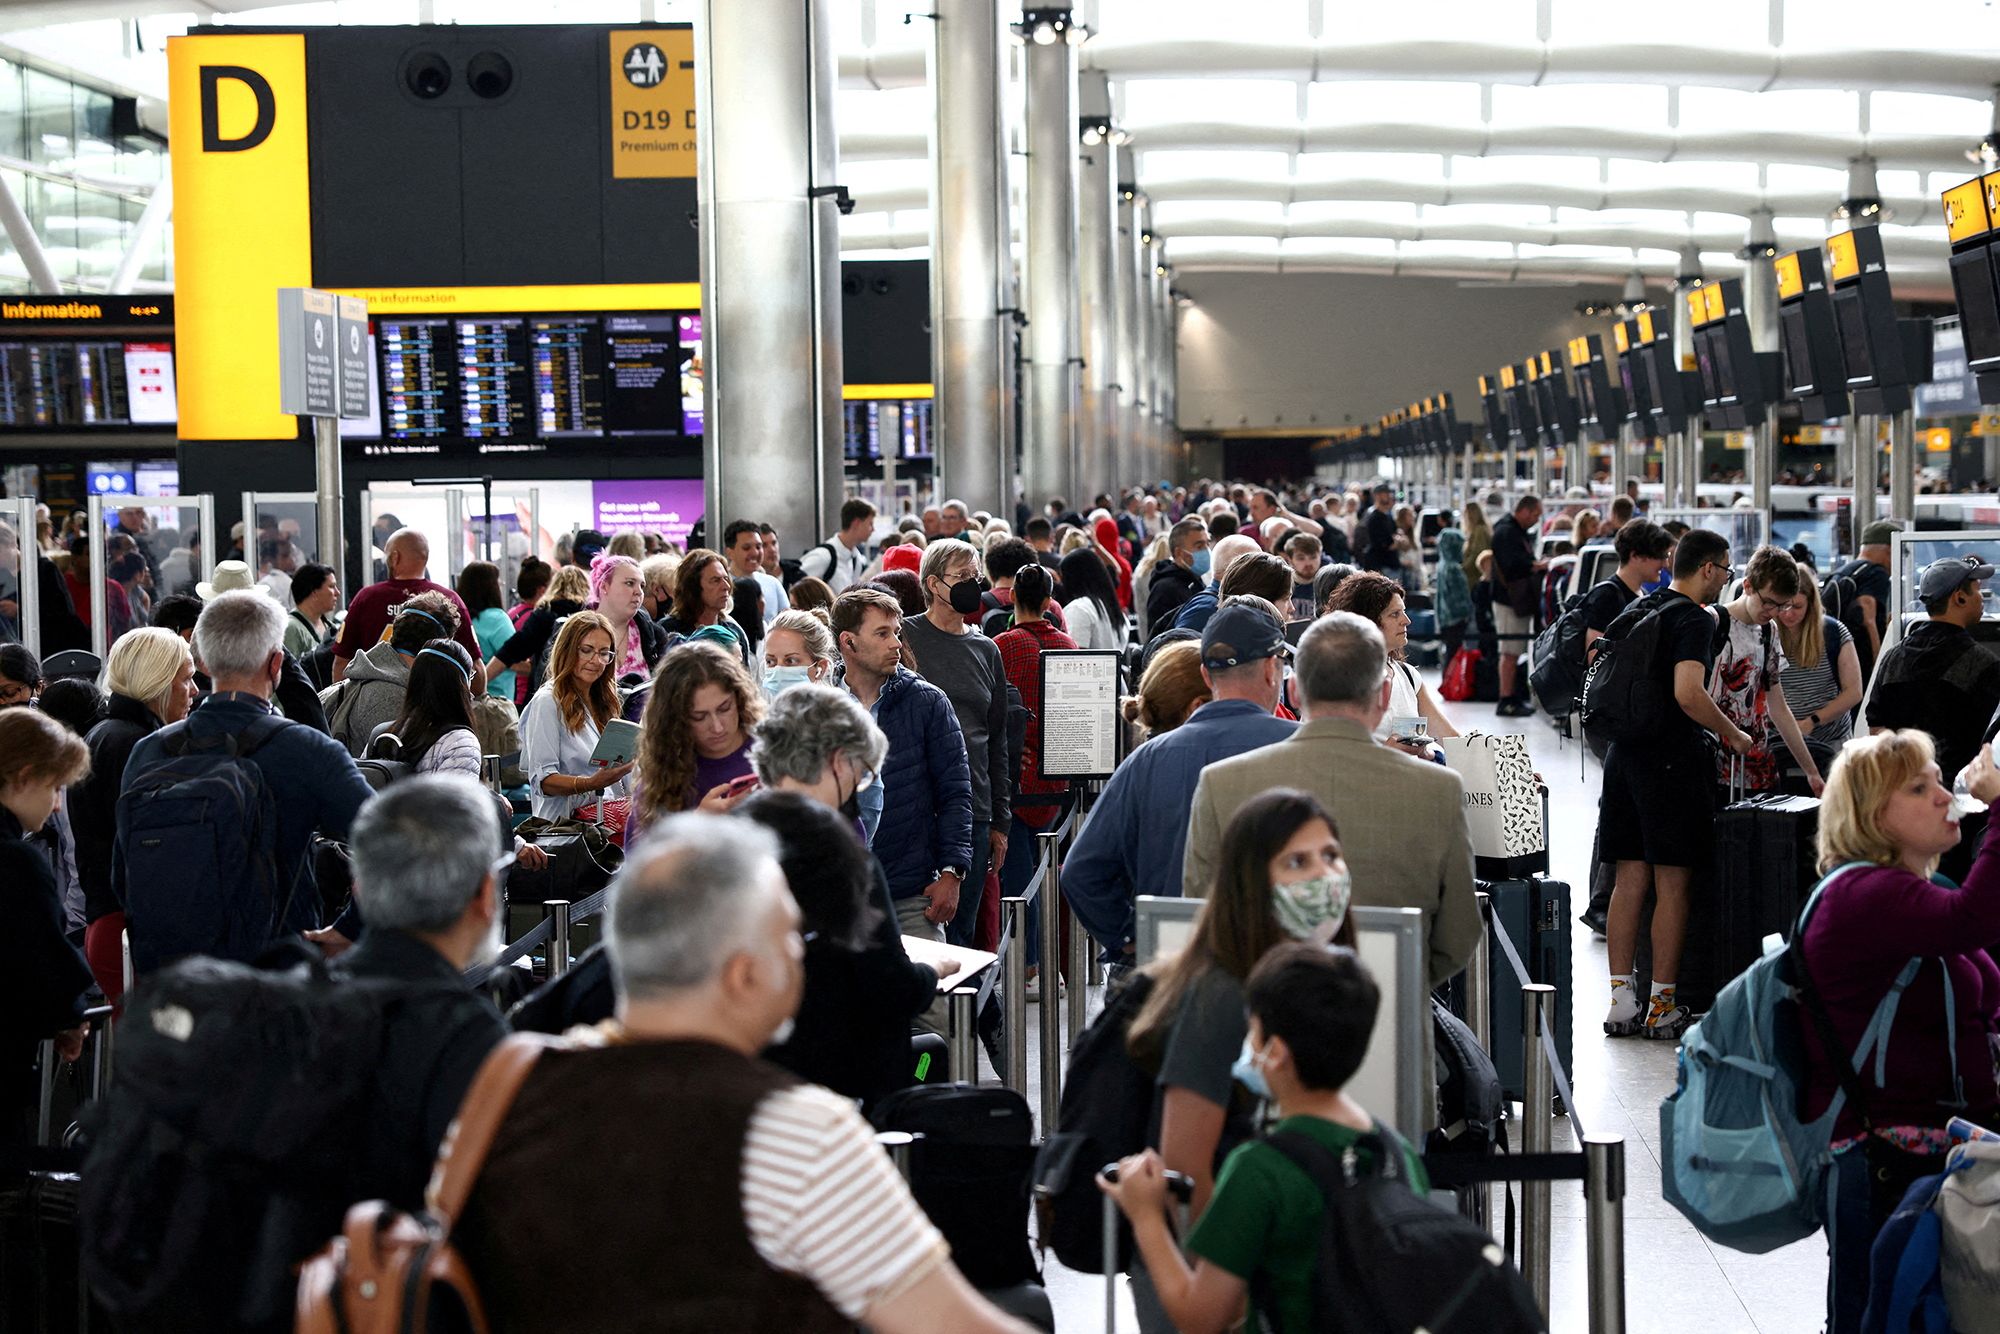 Travelling to London? Heathrow airport staff is launching strikes. Details  here